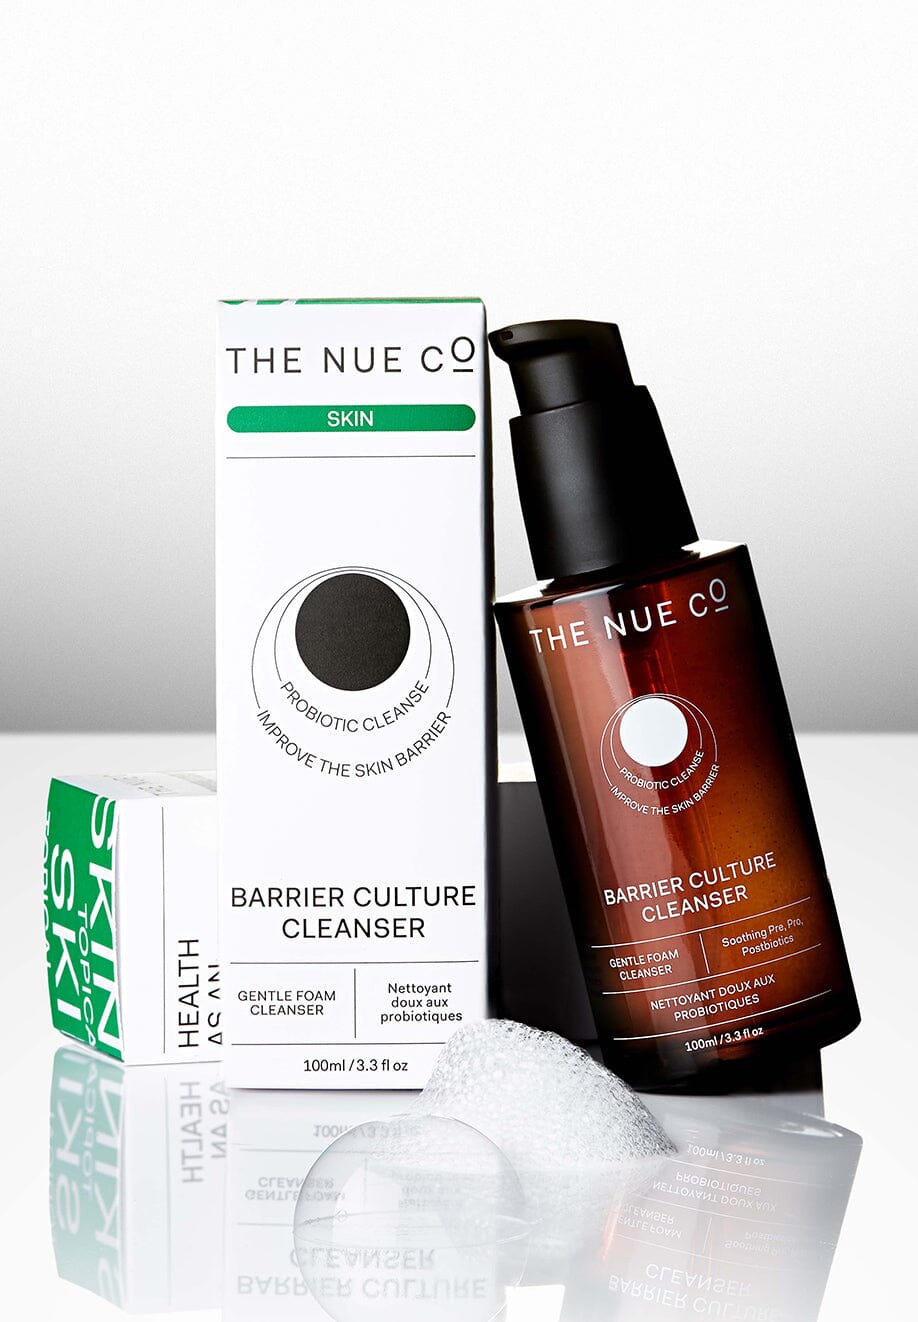 BARRIER CULTURE CLEANSER single The Nue Co. 